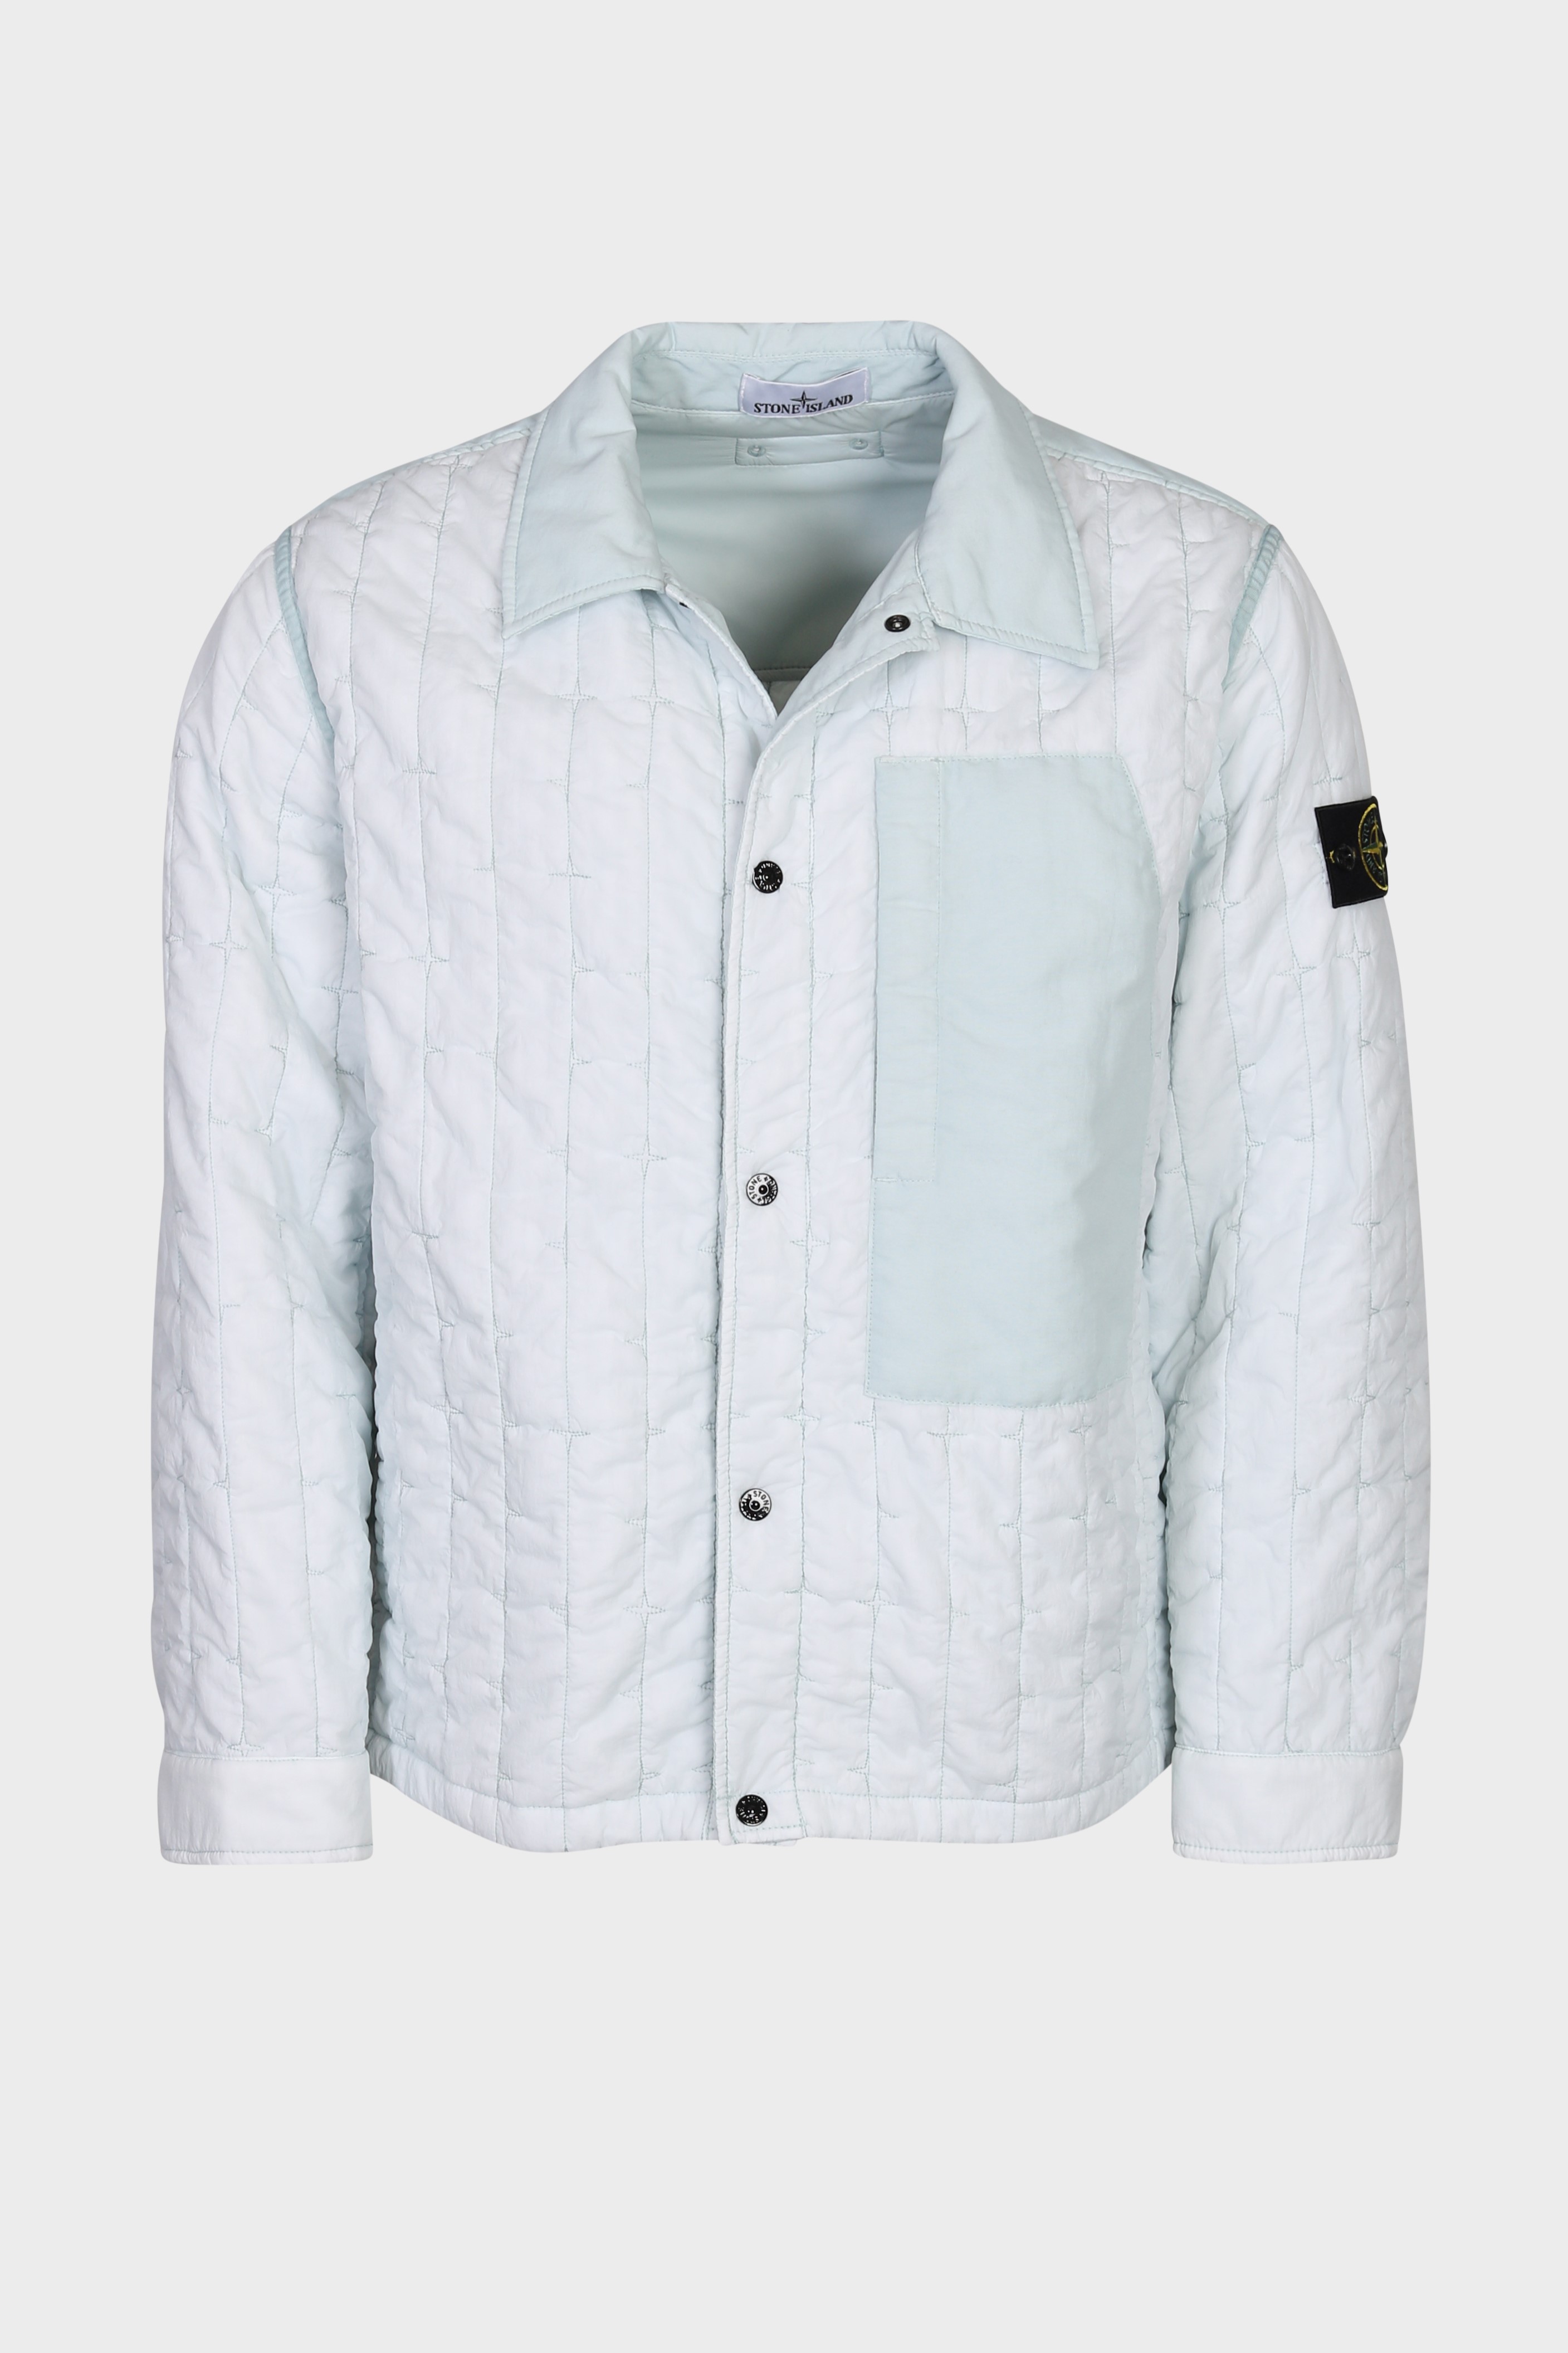 STONE ISLAND Quilted Nylon Stella Jacket in Sky Blue 3XL